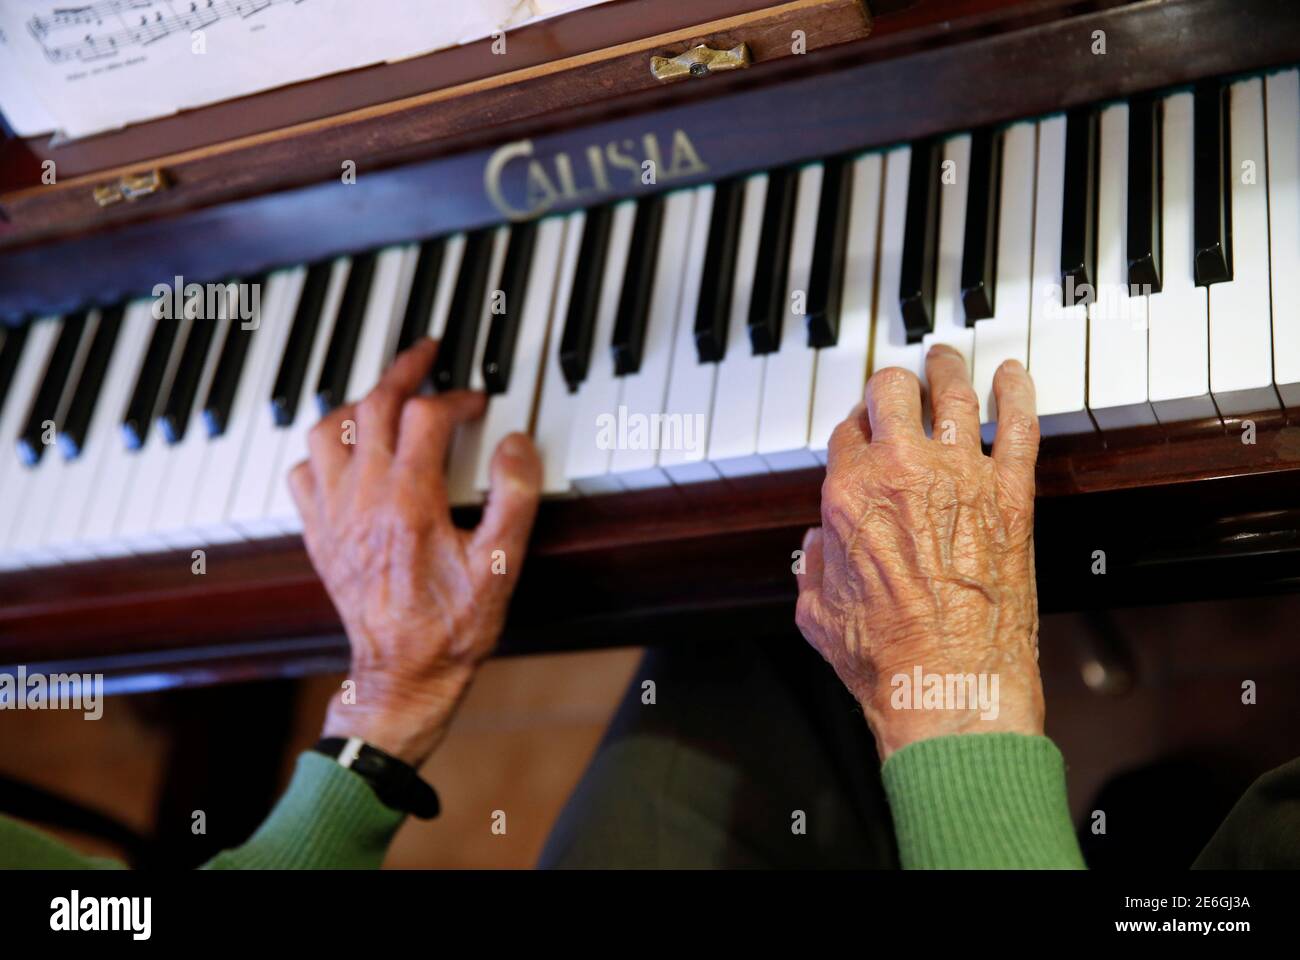 Pedro Rodriguez, 106, plays piano at home in Cangas de Onis, Asturias, in  northern Spain, July 9, 2016. Rodriguez plays piano every day in the living  room of the flat where he